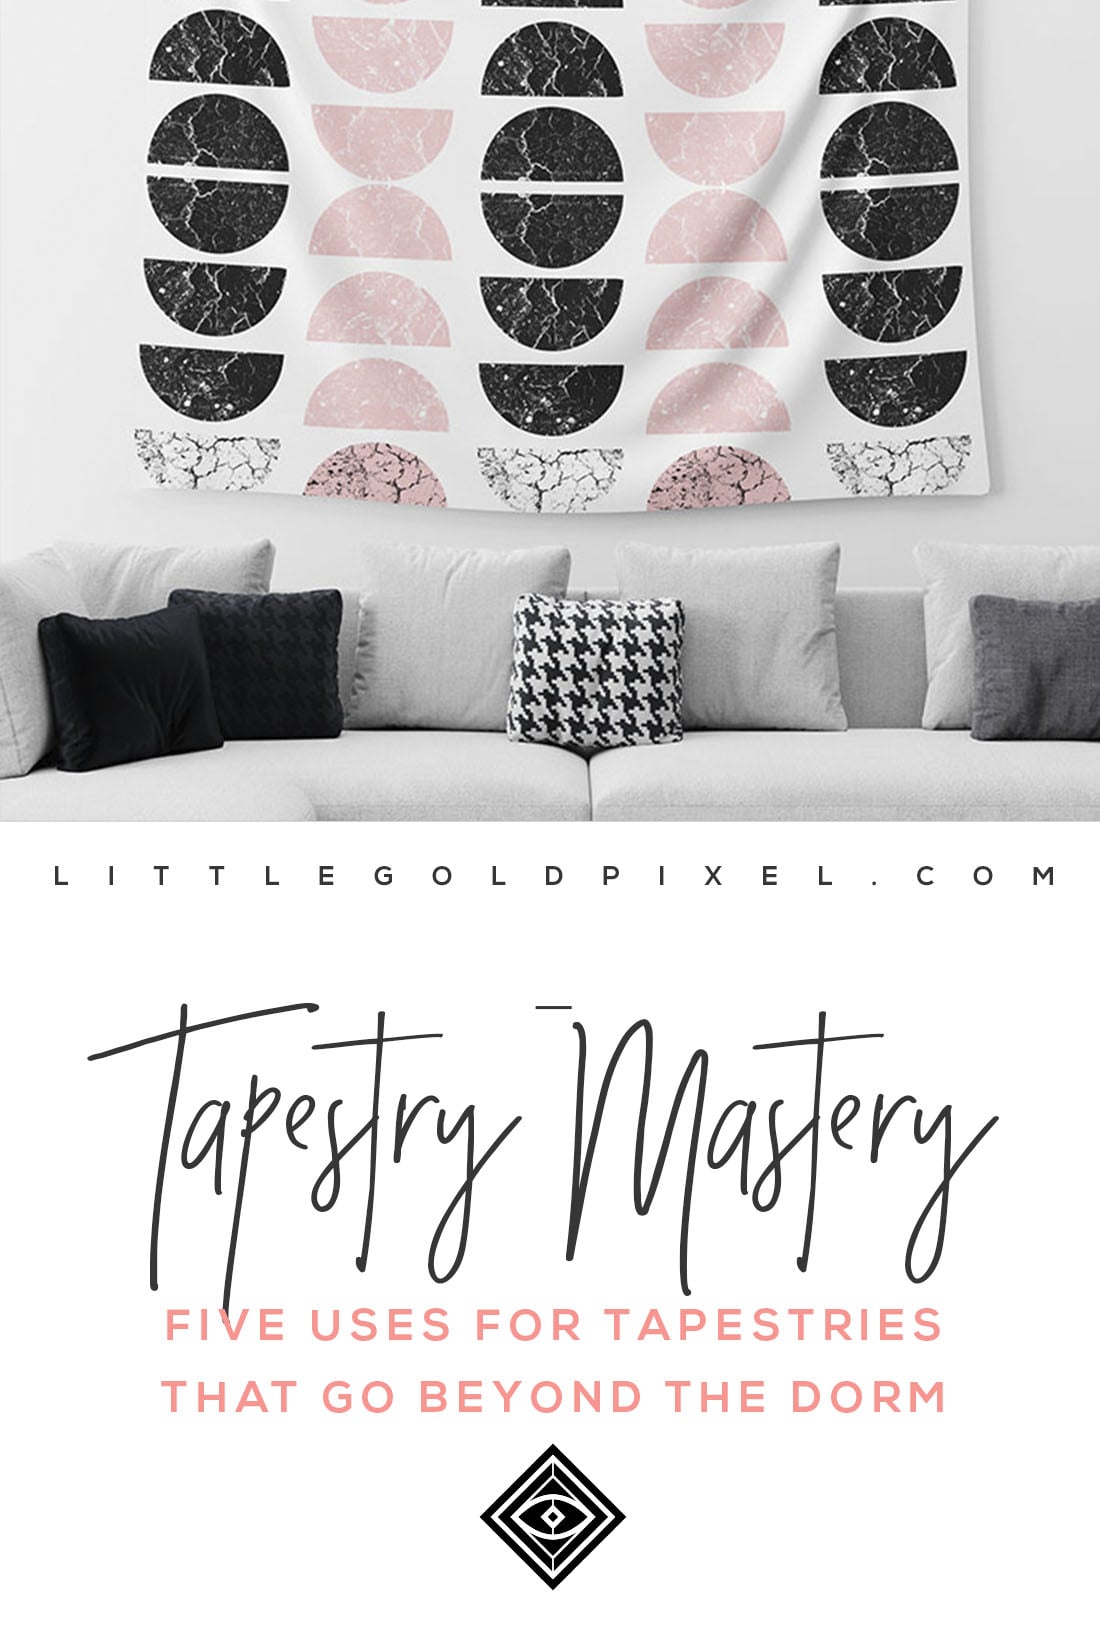 5 Tapestry Decor Ideas That Go Beyond the Dorm • Little Gold Pixel • In which I explore 5 tapestry decor ideas that go beyond the dorm. Decorate your grown-up space with these boho wall art essentials, and look luxe doing it!

#tapestry #decor #wallart #wallhangings #decorideas #decortips